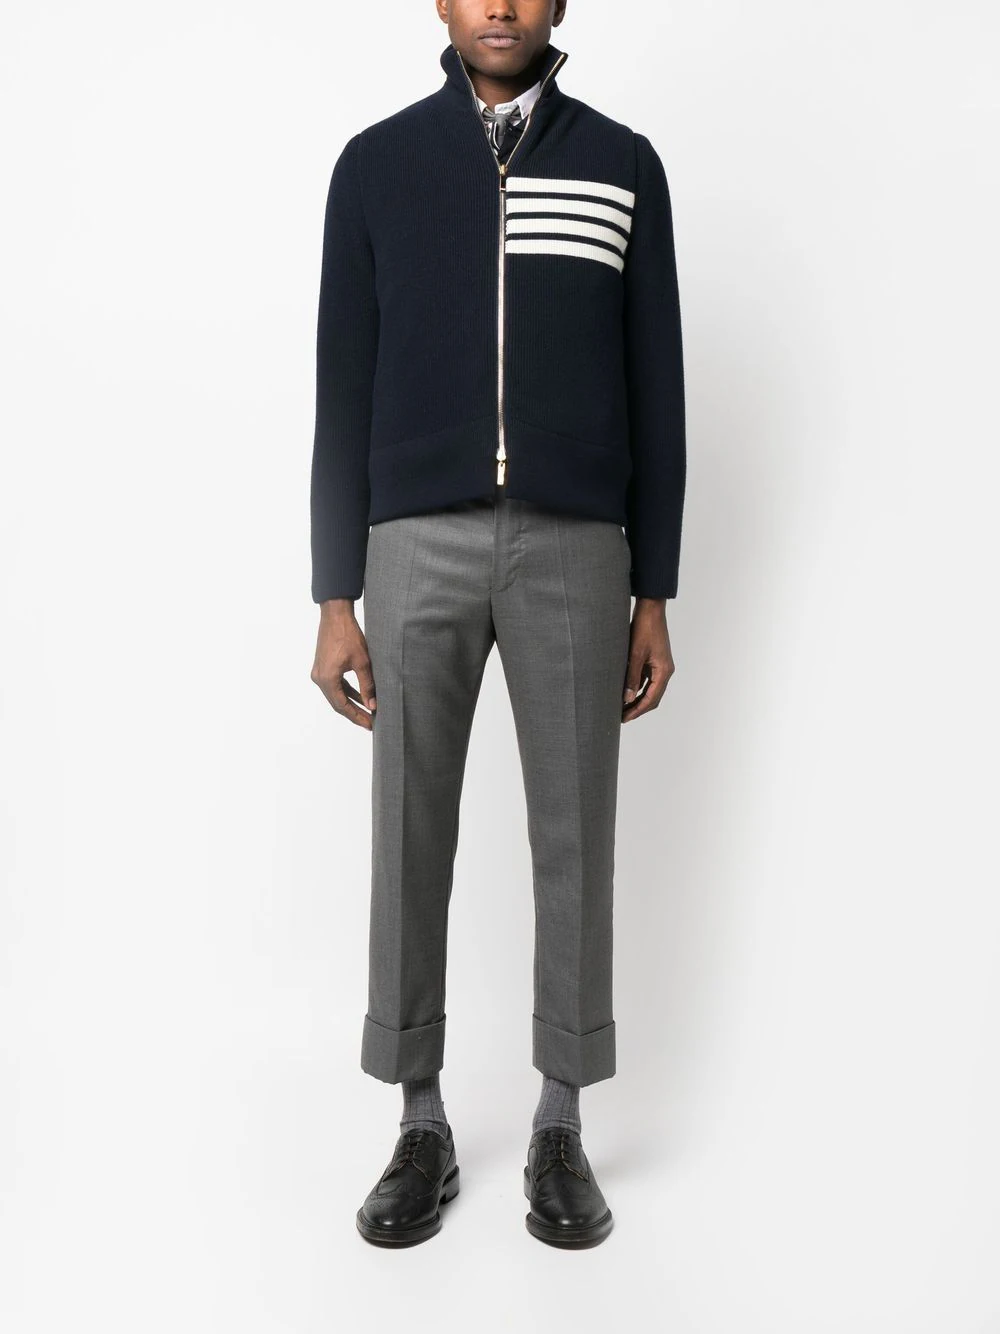 Thom Browne - Merino and Jersey Padded Reversible 4-Bar Funnel Neck Jacket - 0 - Grey - Male